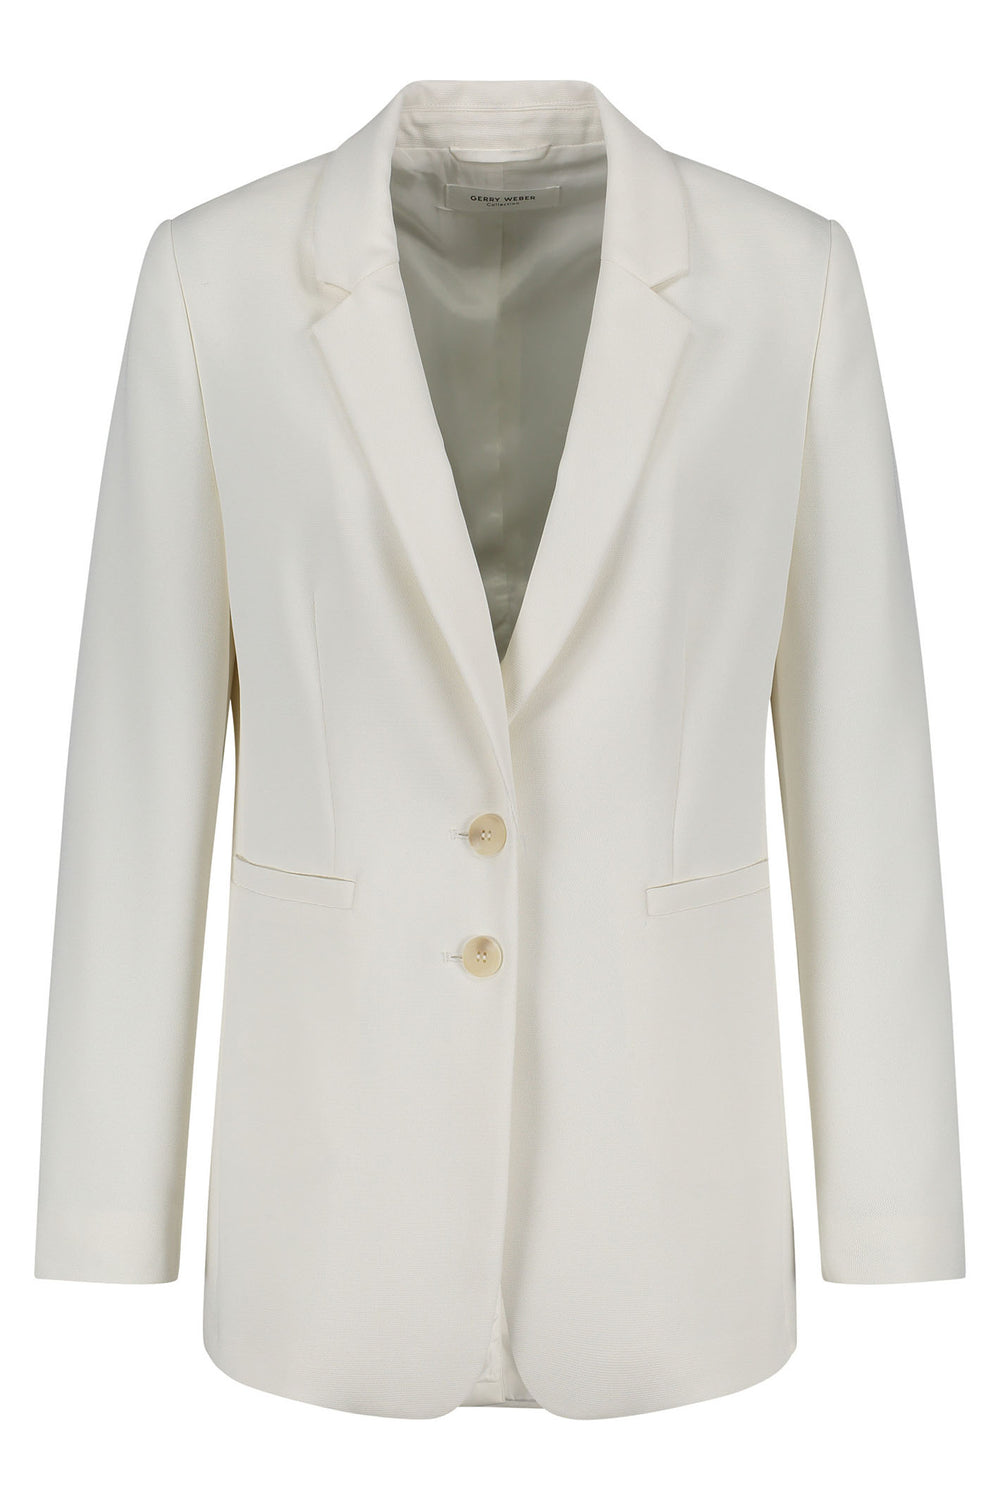 Gerry Weber 330046 Off White Two Button Jacket - Experience Boutique